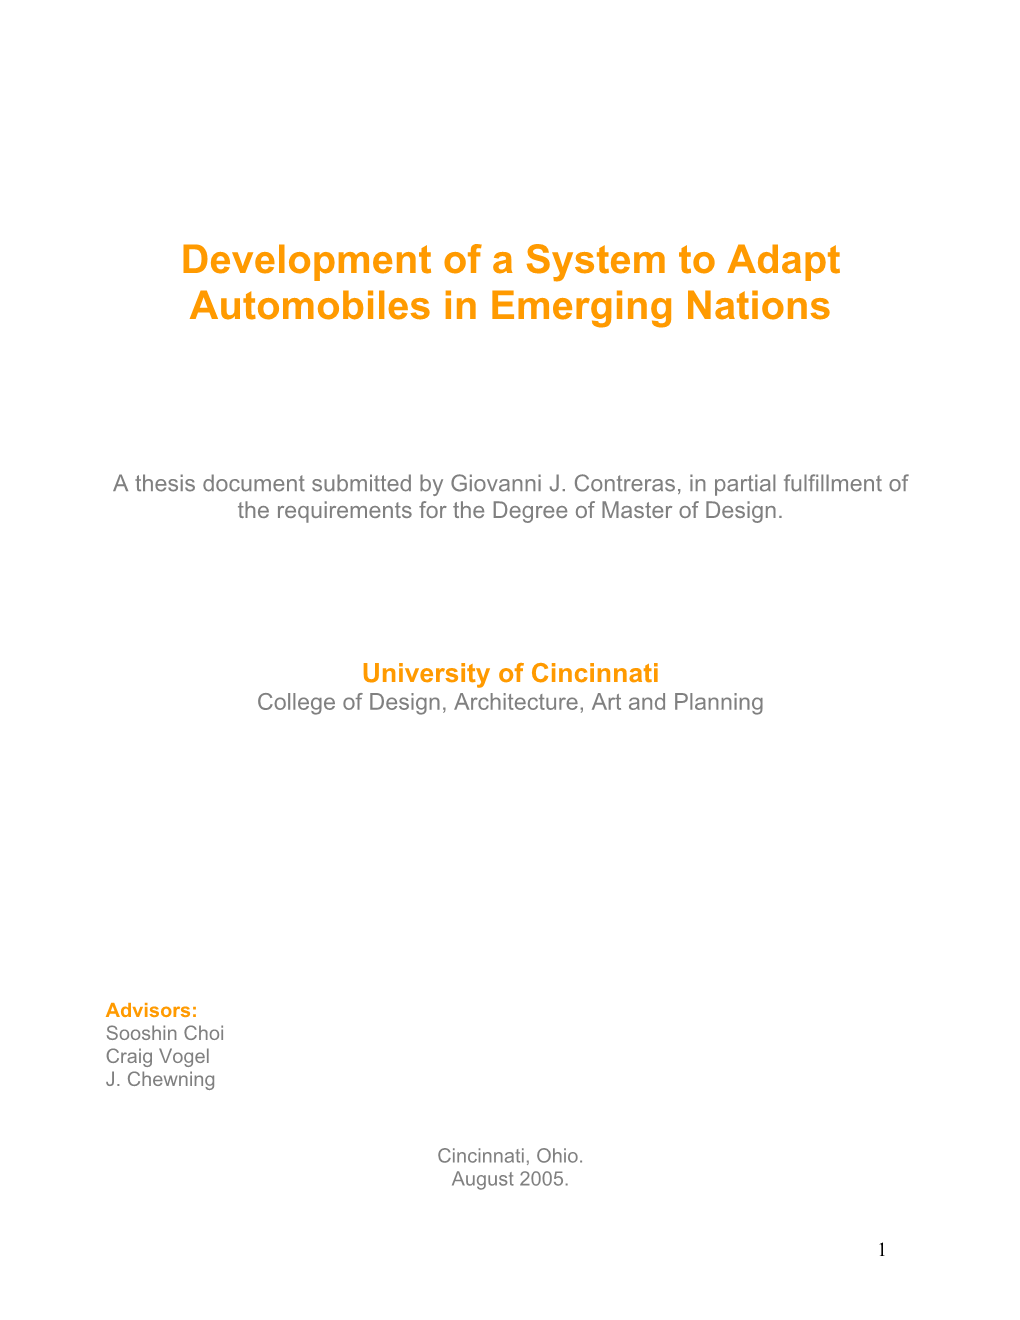 Development of a System to Adapt Automobiles in Emerging Nations